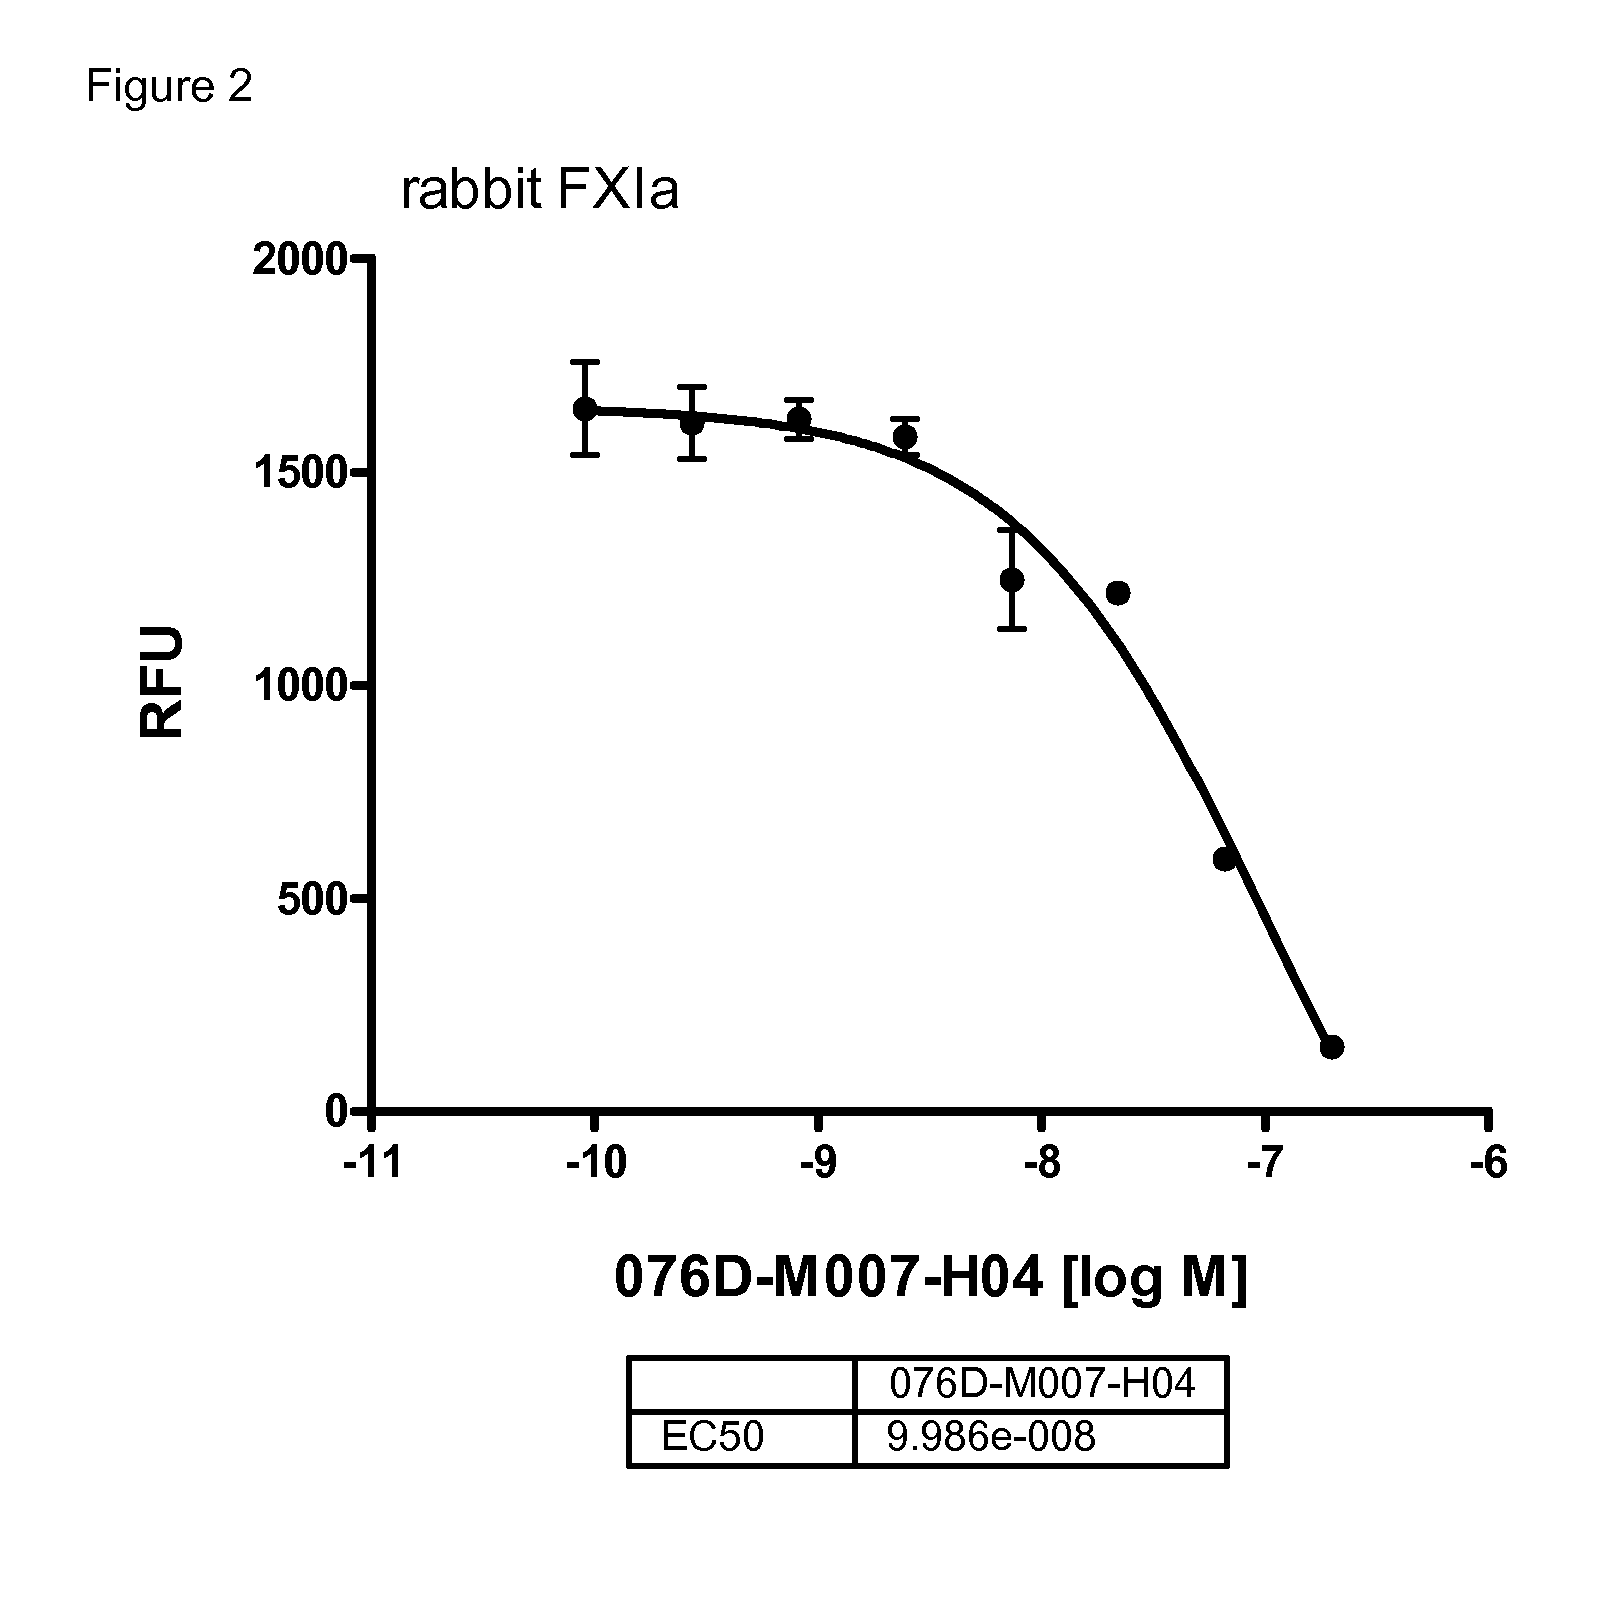 Antibodies capable of binding to the coagulation Factor XI and/or its activated form factor XIa and uses thereof